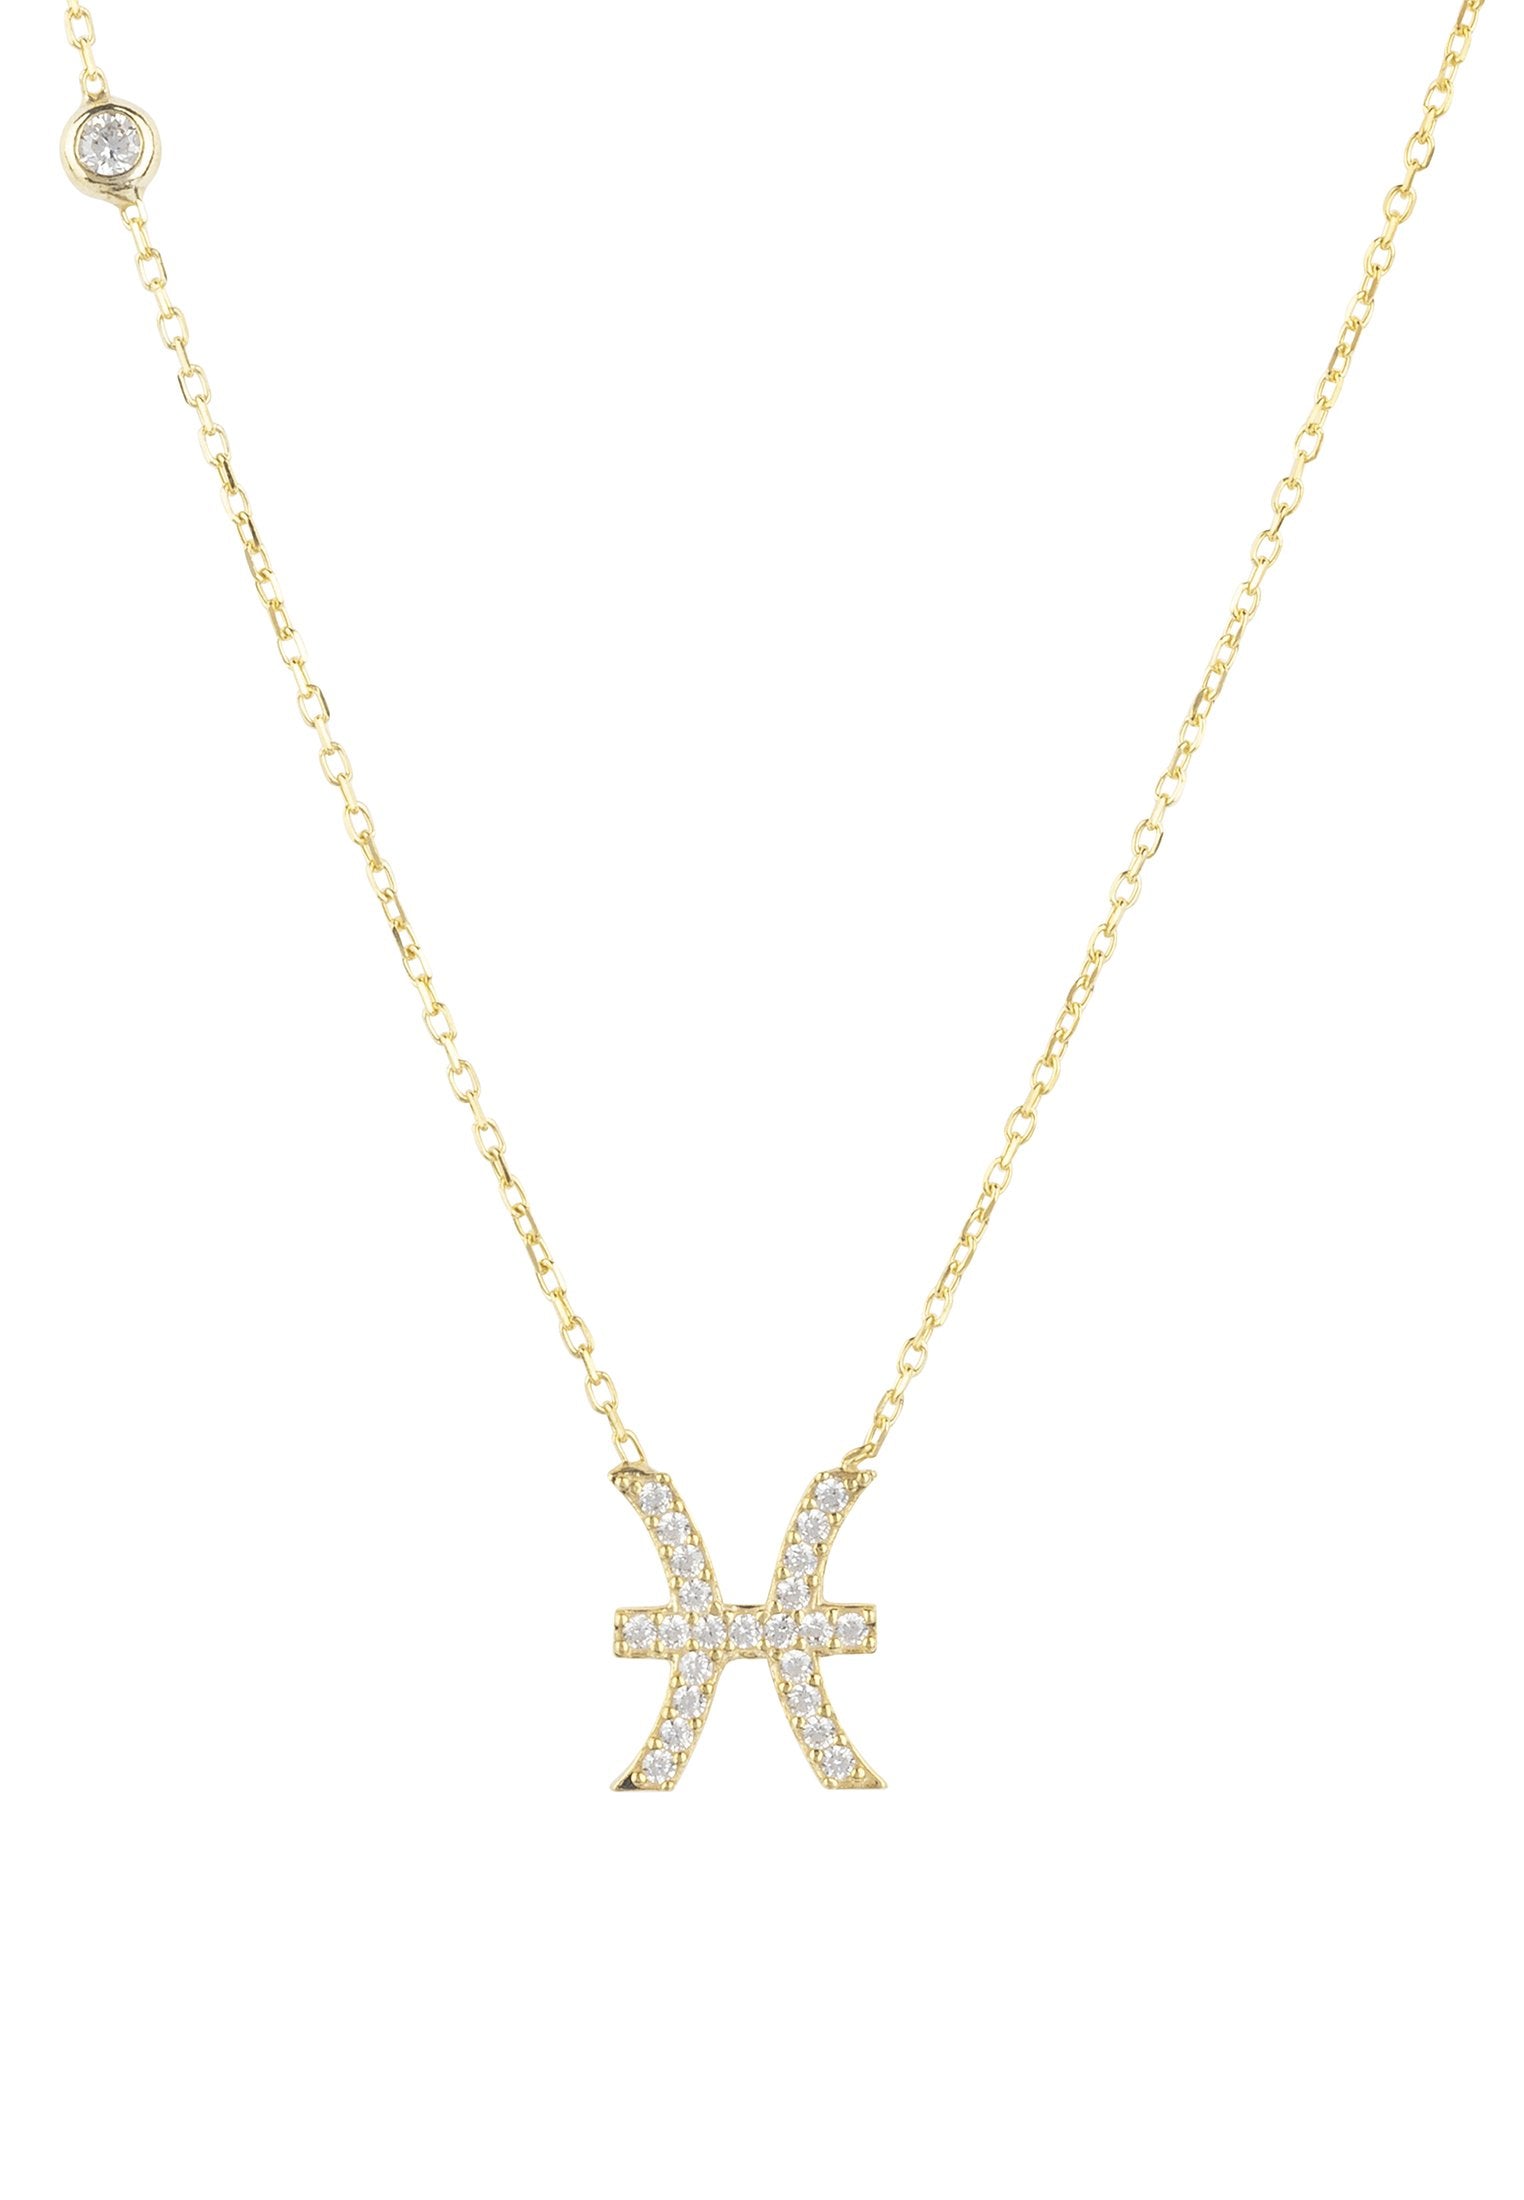 Zodiac Star Sign Pendant Necklace Gold Pisces - Jewelry & Watches - Bijou Her -  -  - 